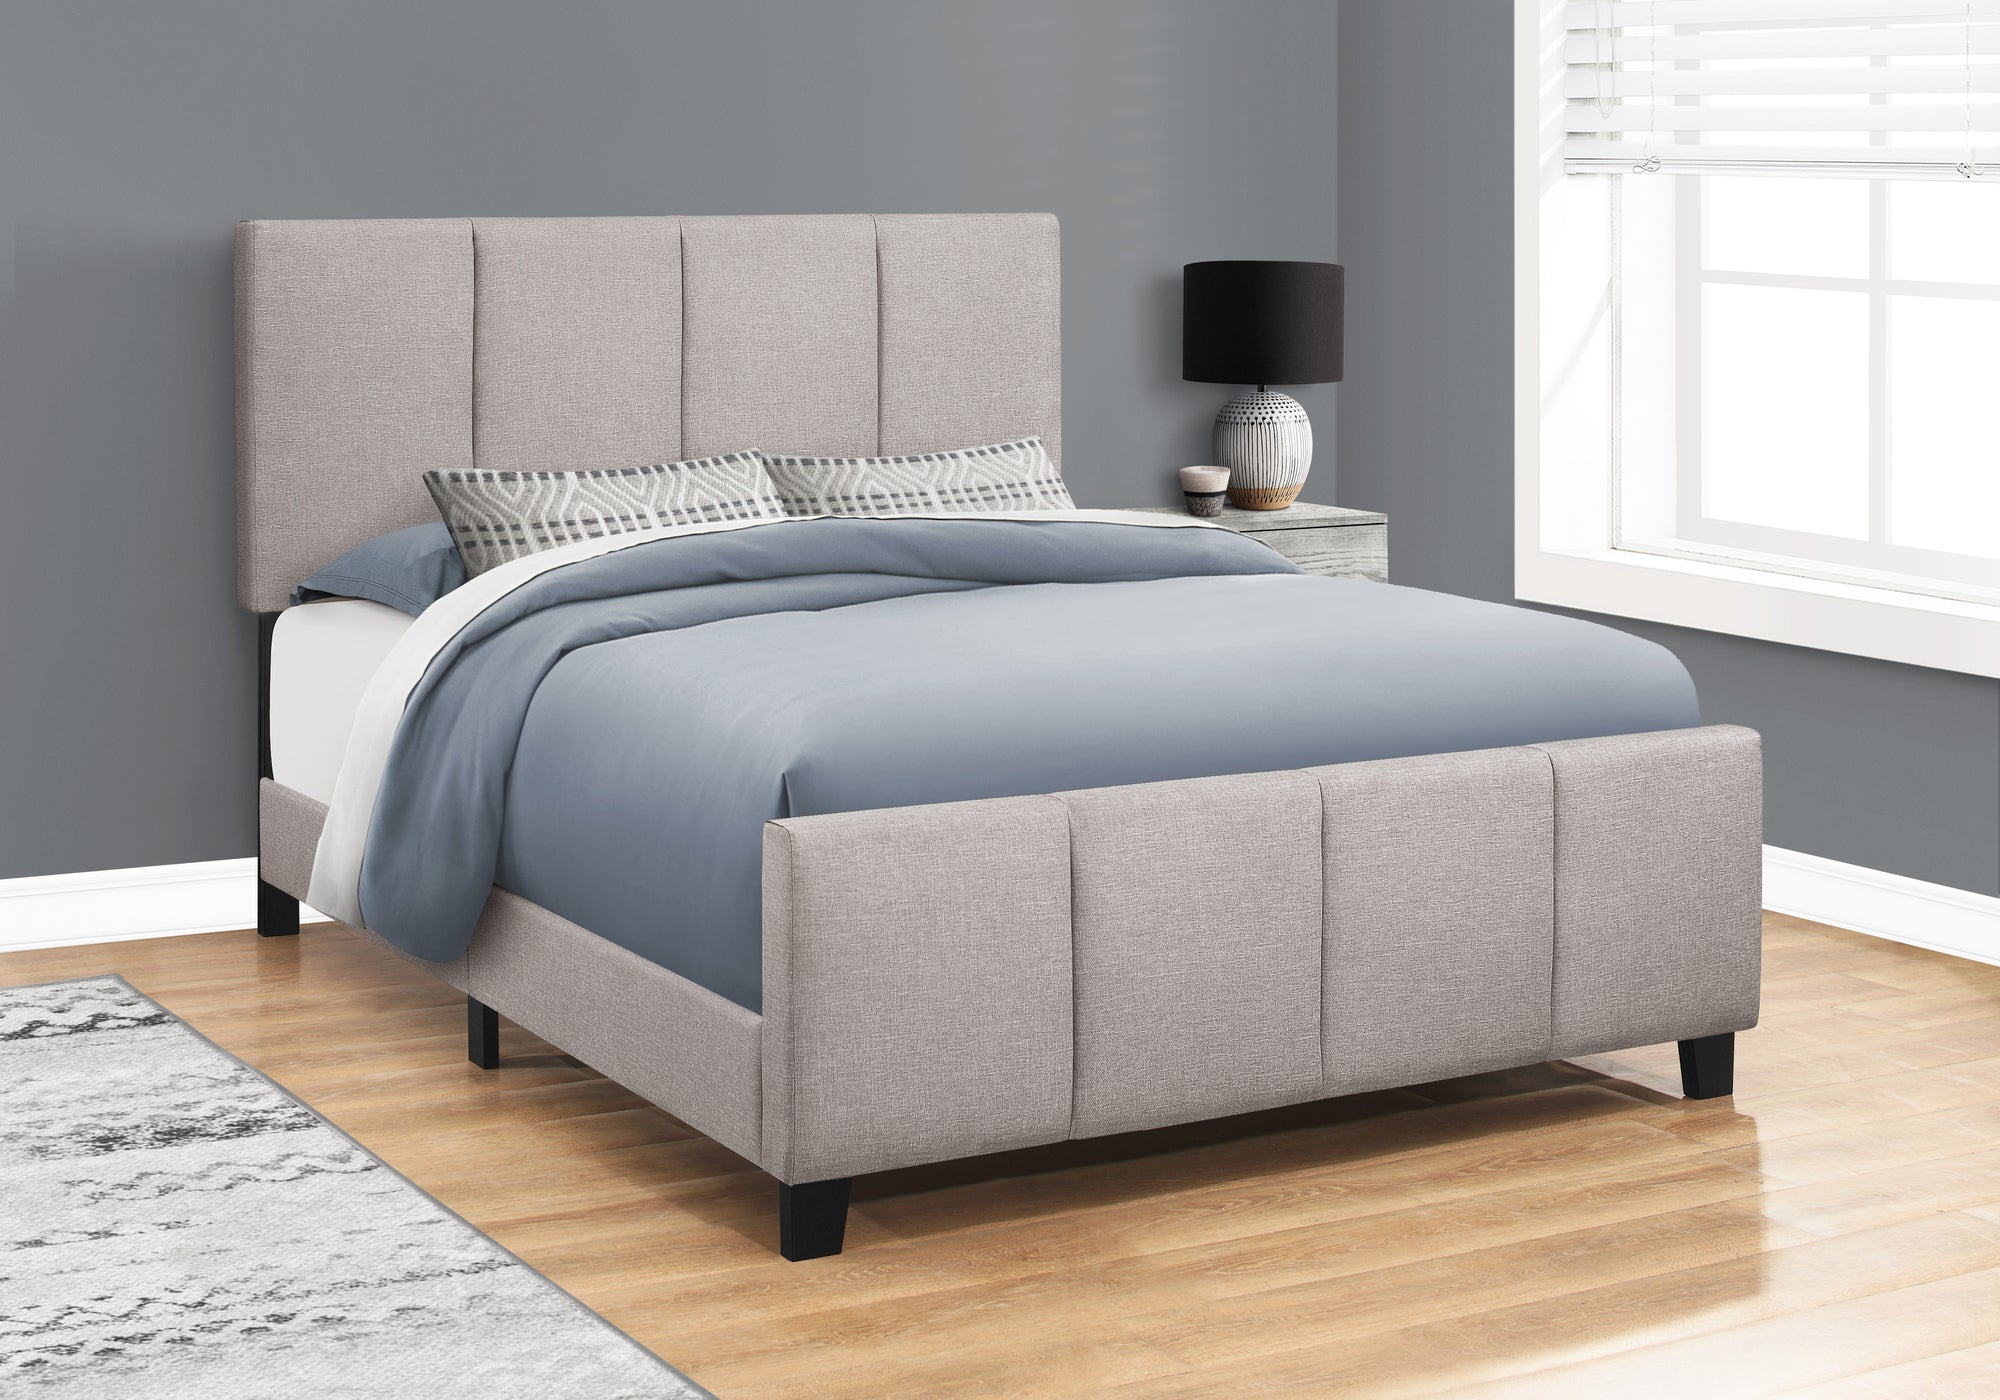 MN-626025Q    Bed, Frame, Platform, Bedroom, Queen Size, Upholstered, Linen Look Fabric, Wood Legs, Grey, Black, Contemporary, Modern